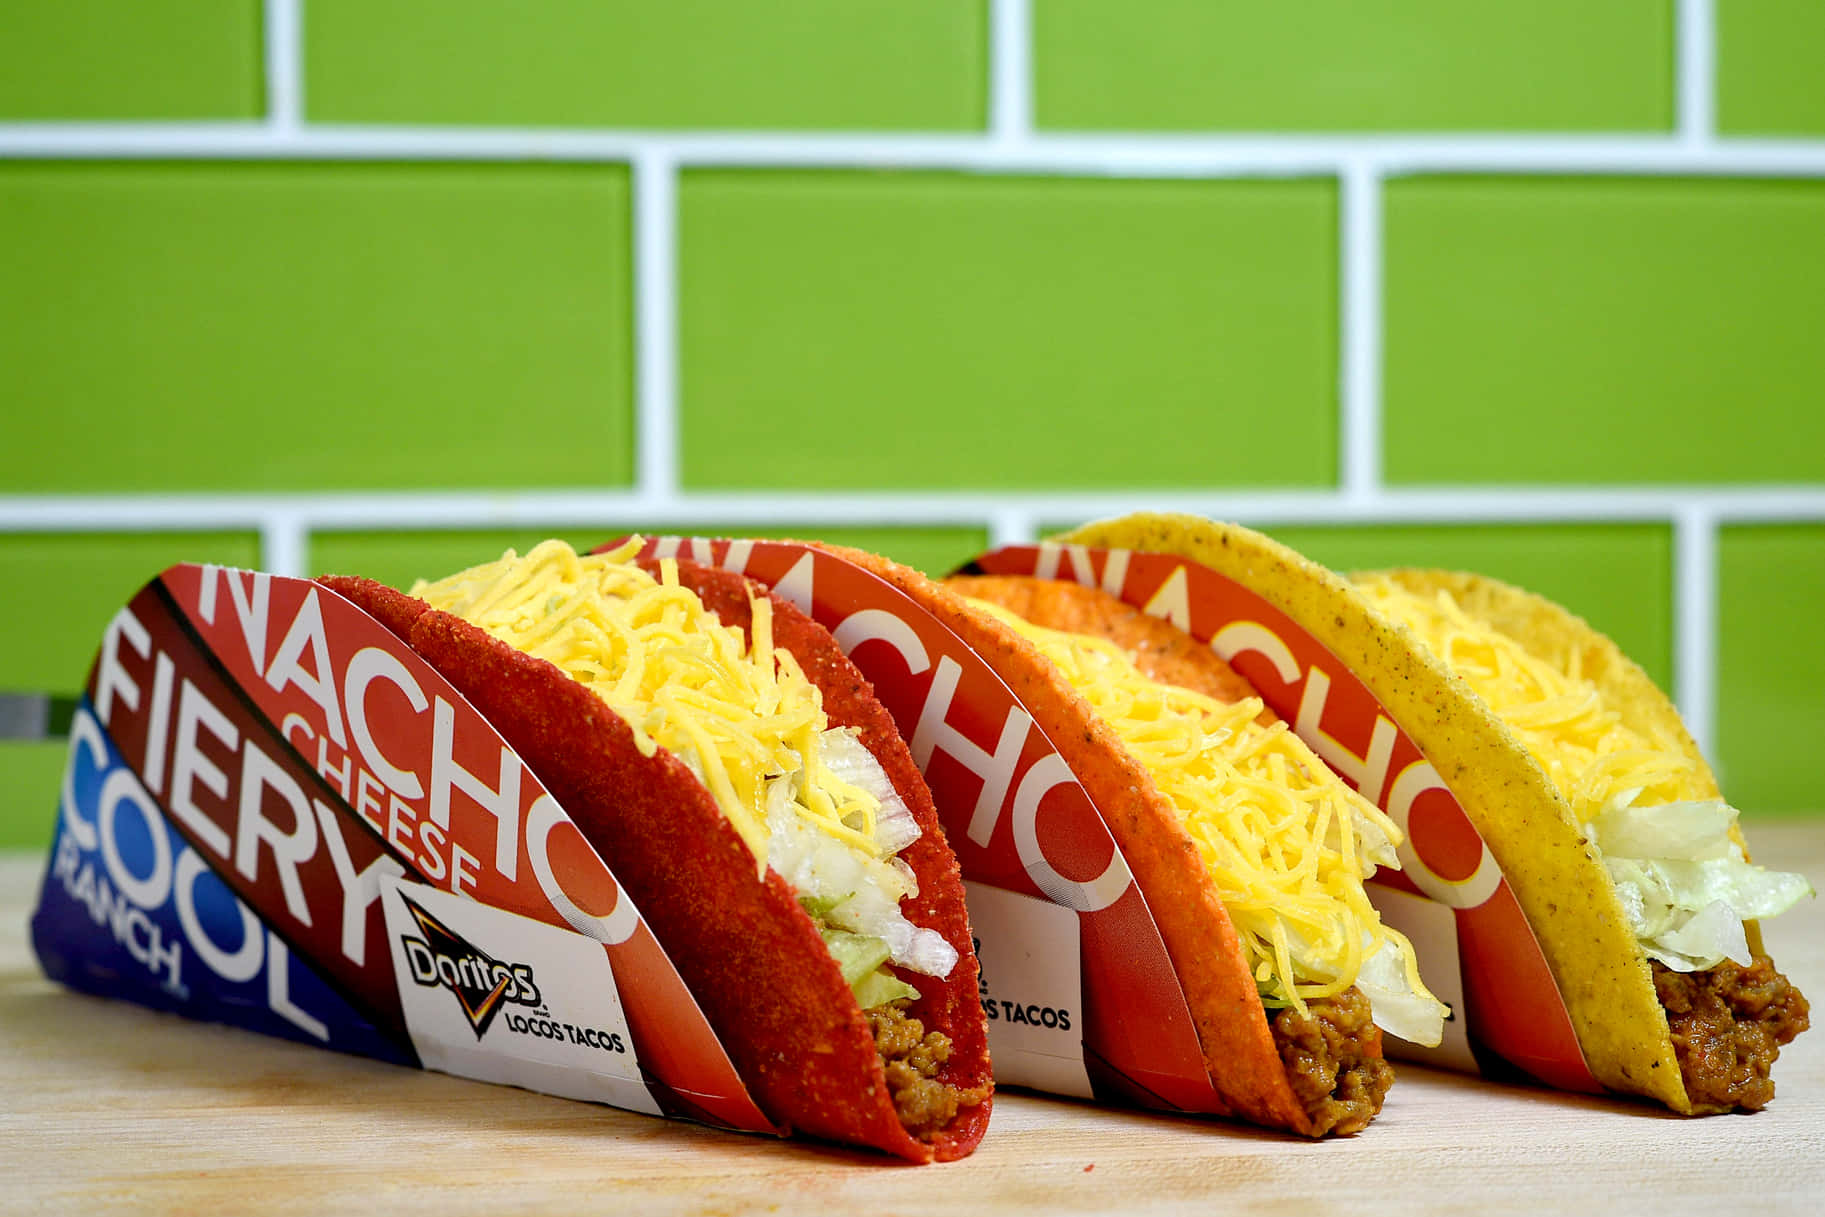 The tastiest tacos are at Taco Bell